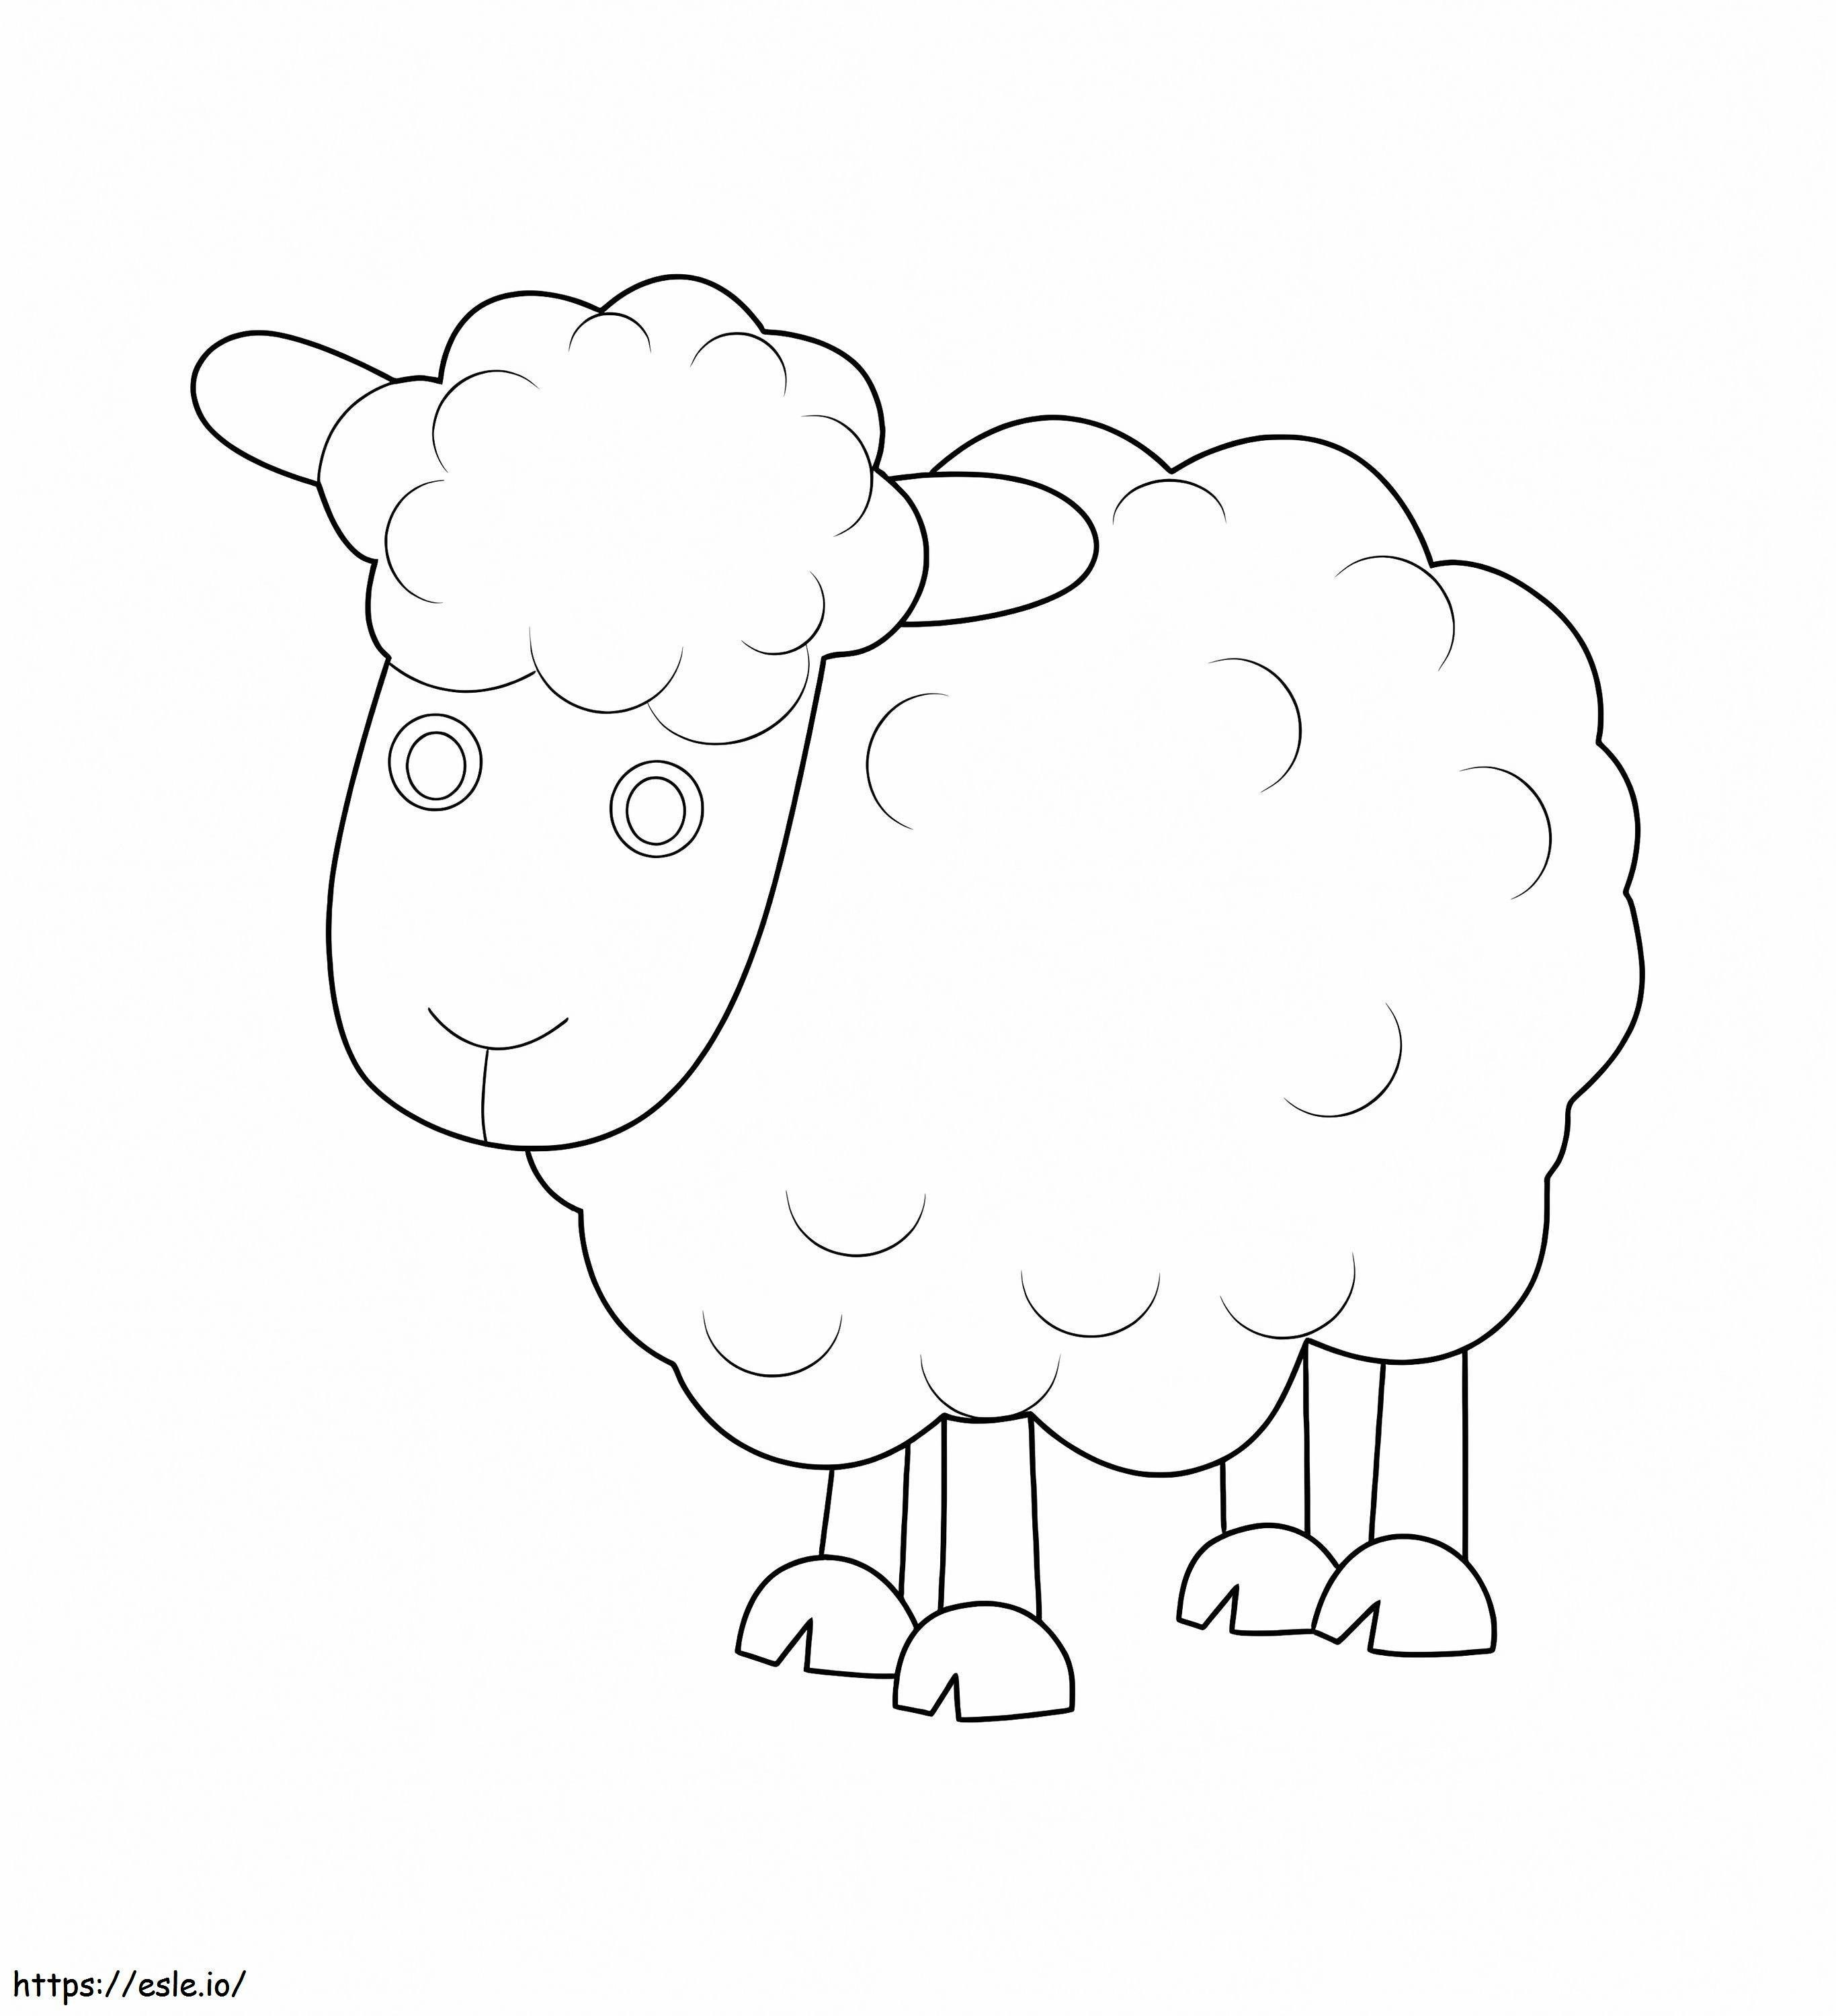 Perfect Sheep coloring page